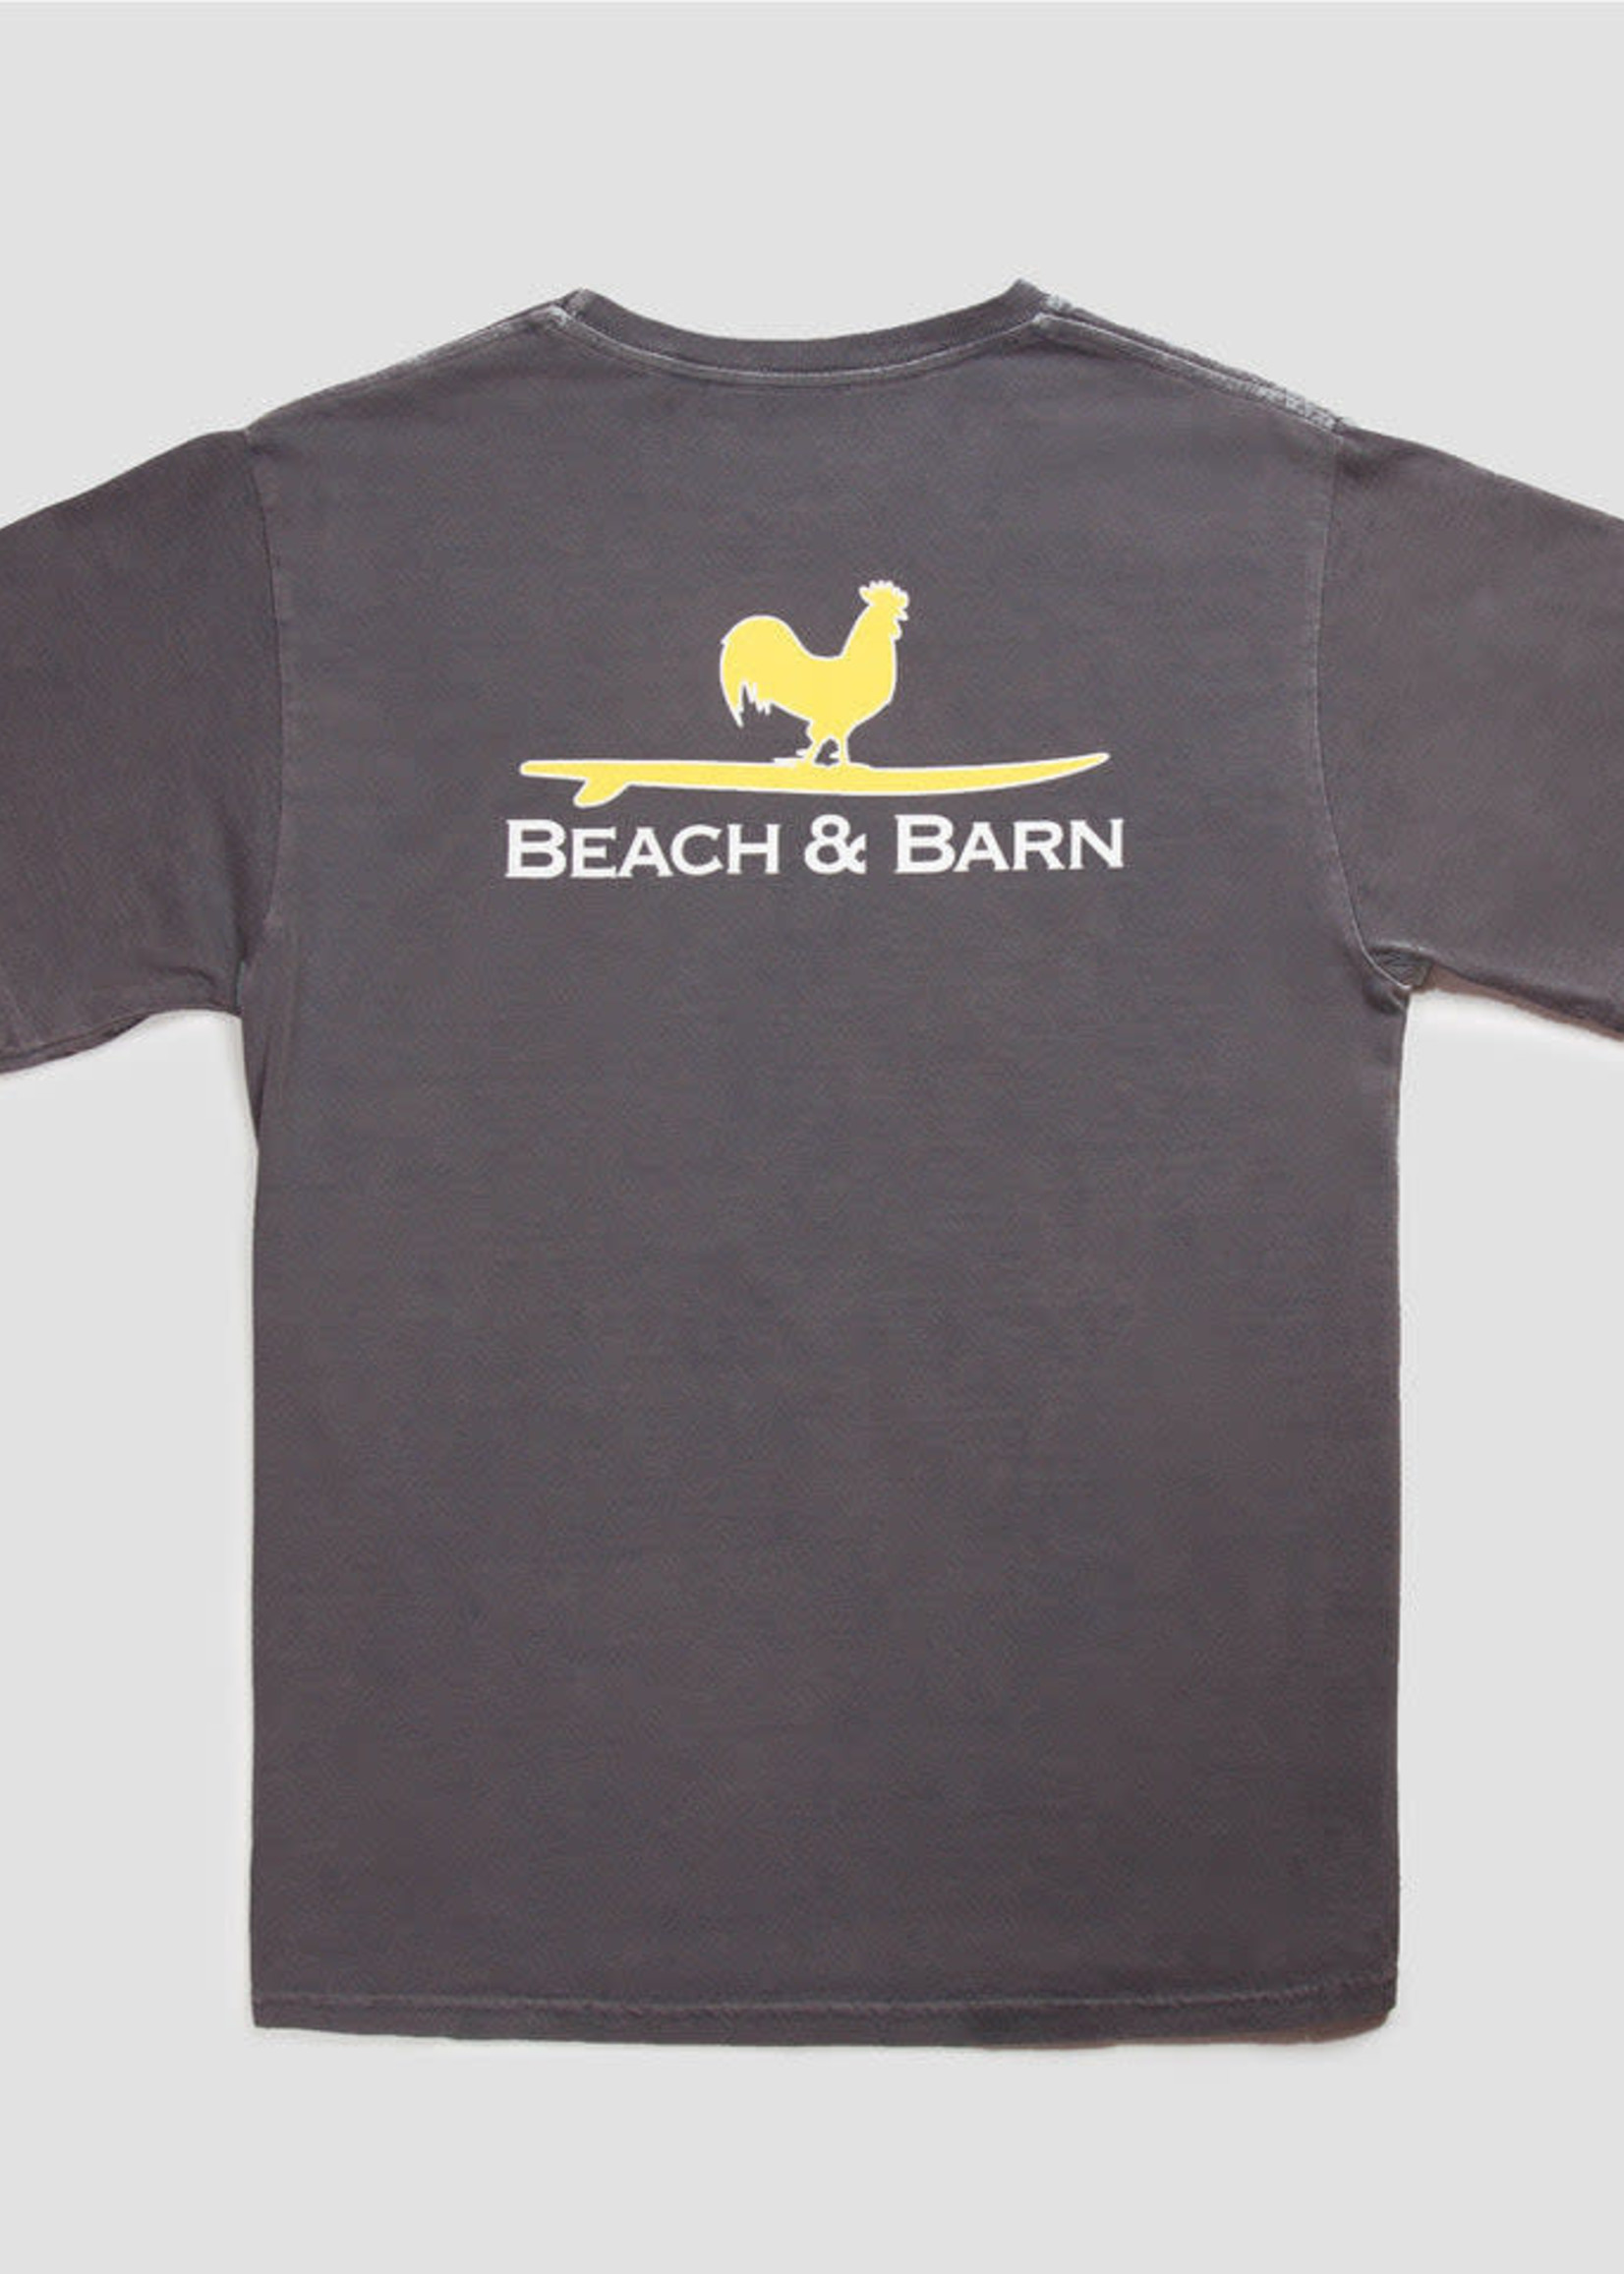 Beach and Barn Surfing Rooster Tee Shirt Graphite